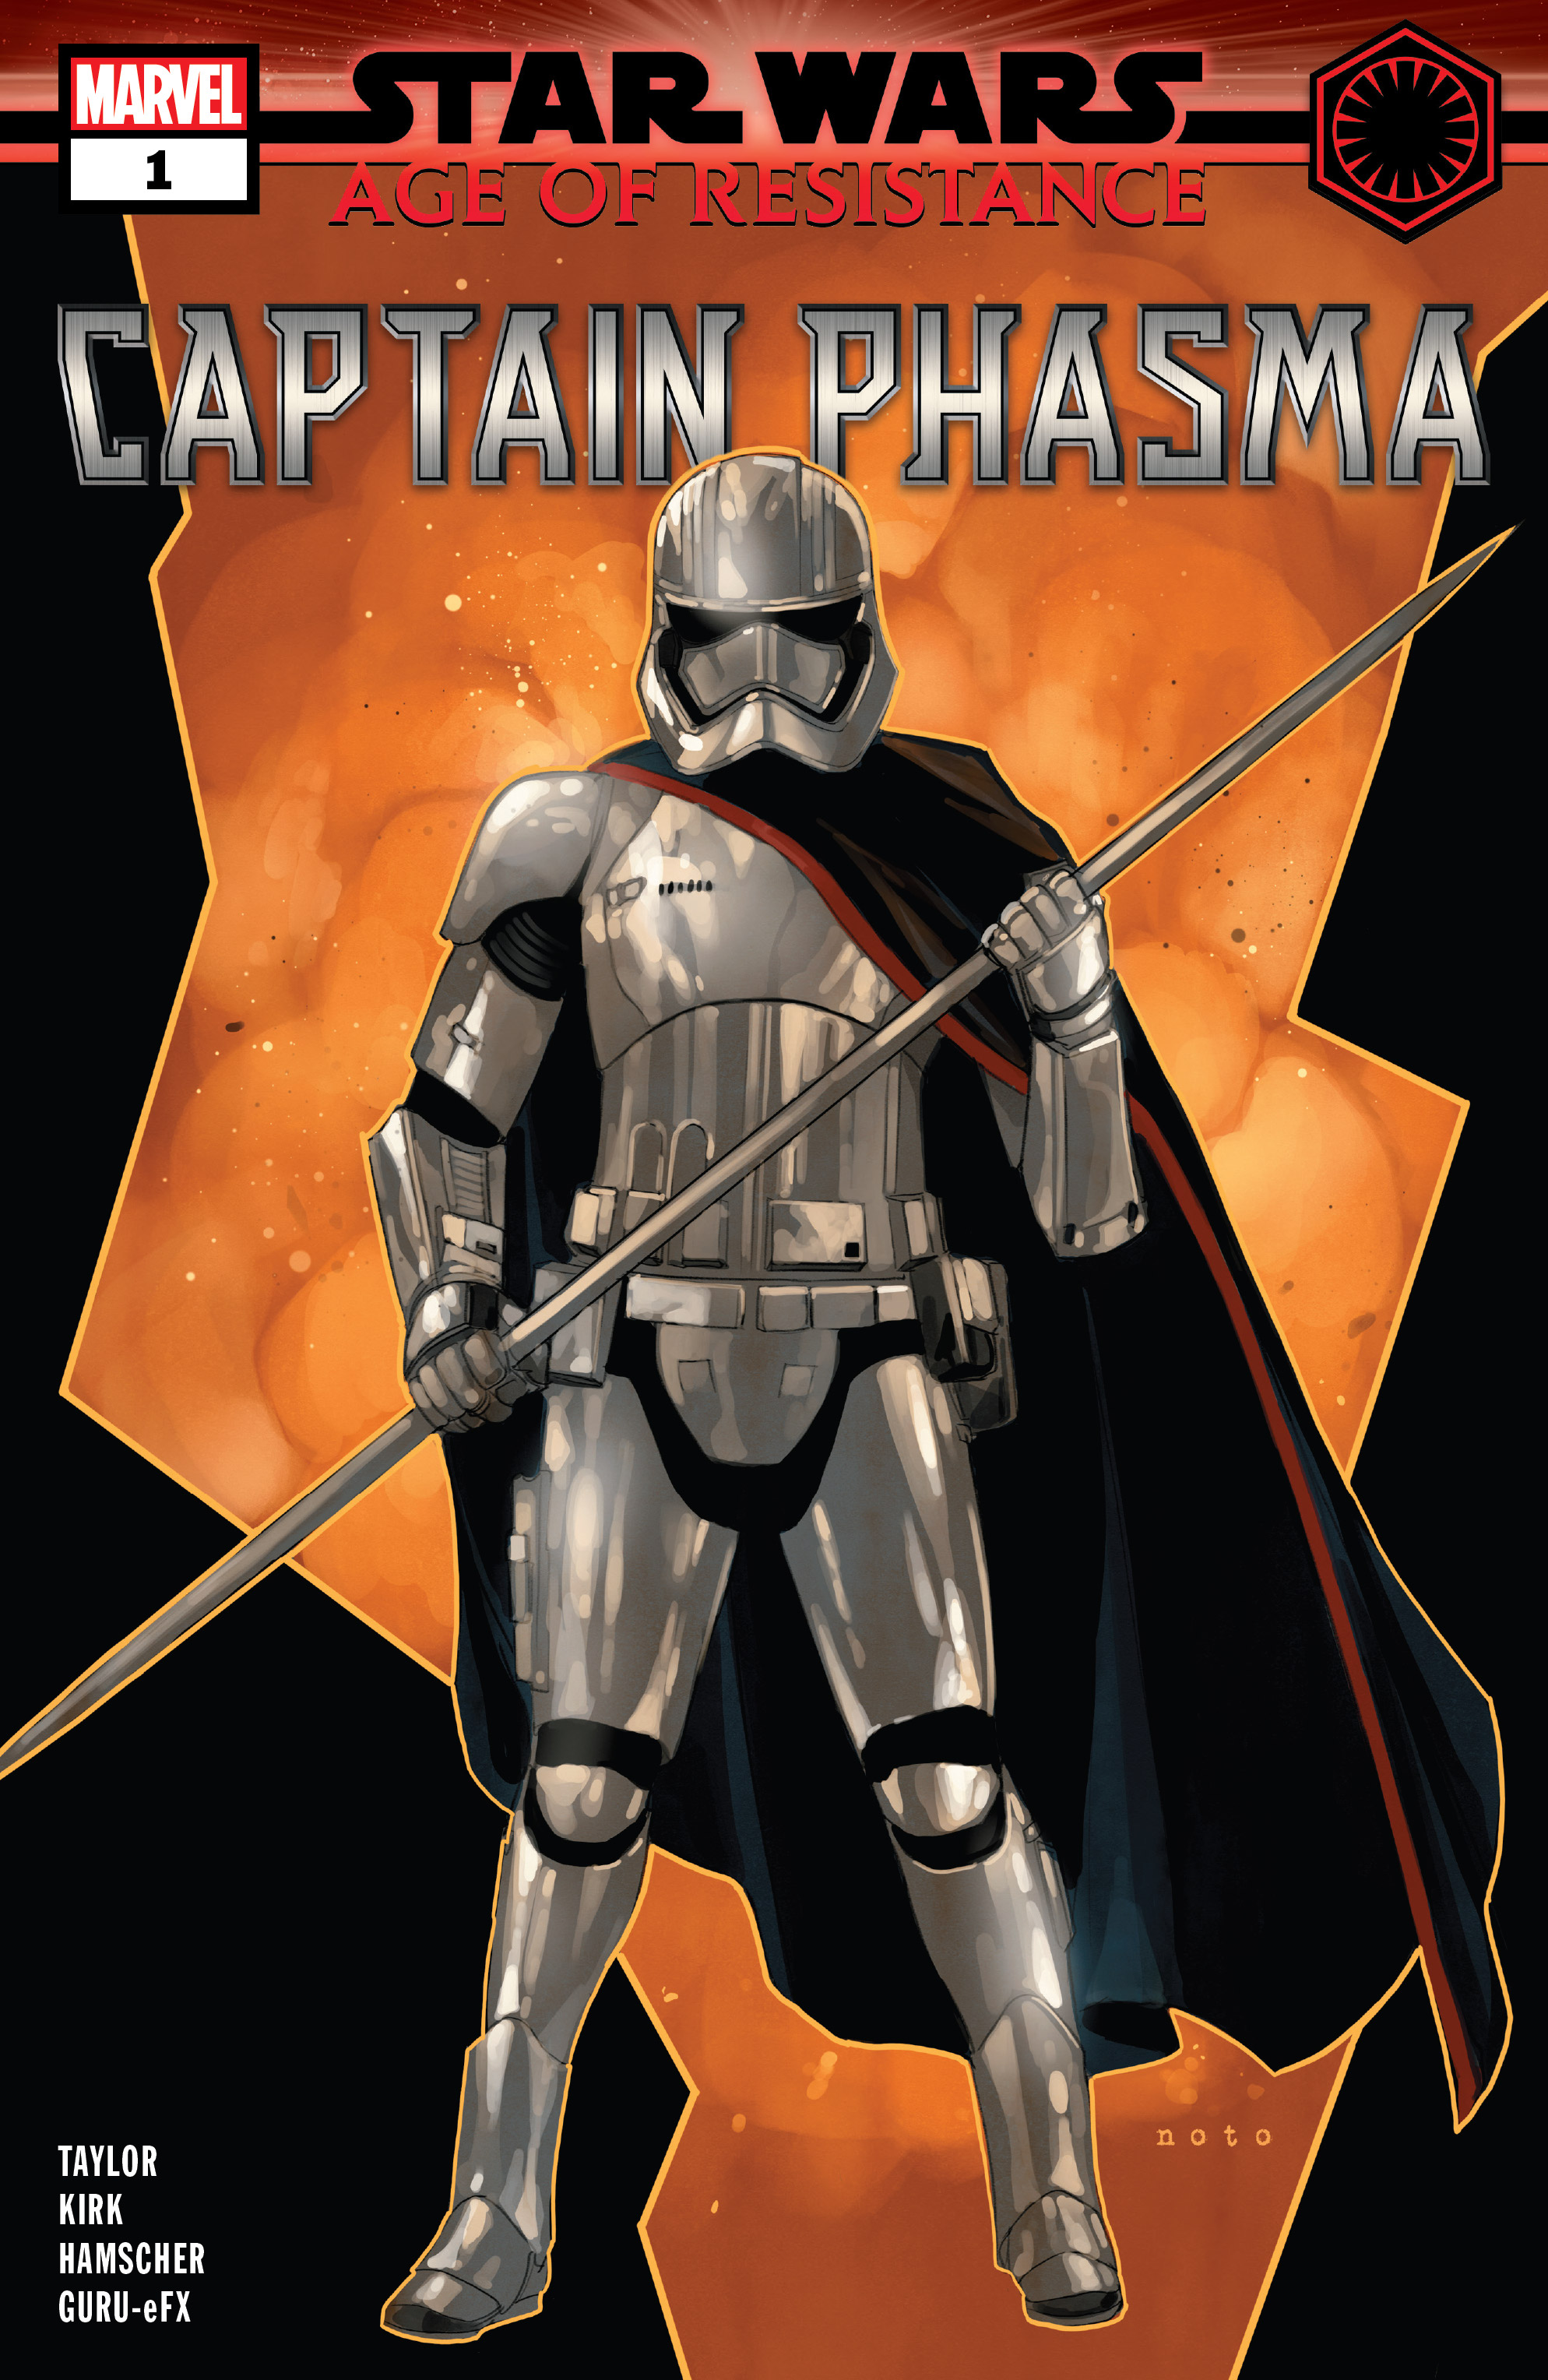 Read online Star Wars: Age Of Resistance comic -  Issue # Captain_Phasma - 1